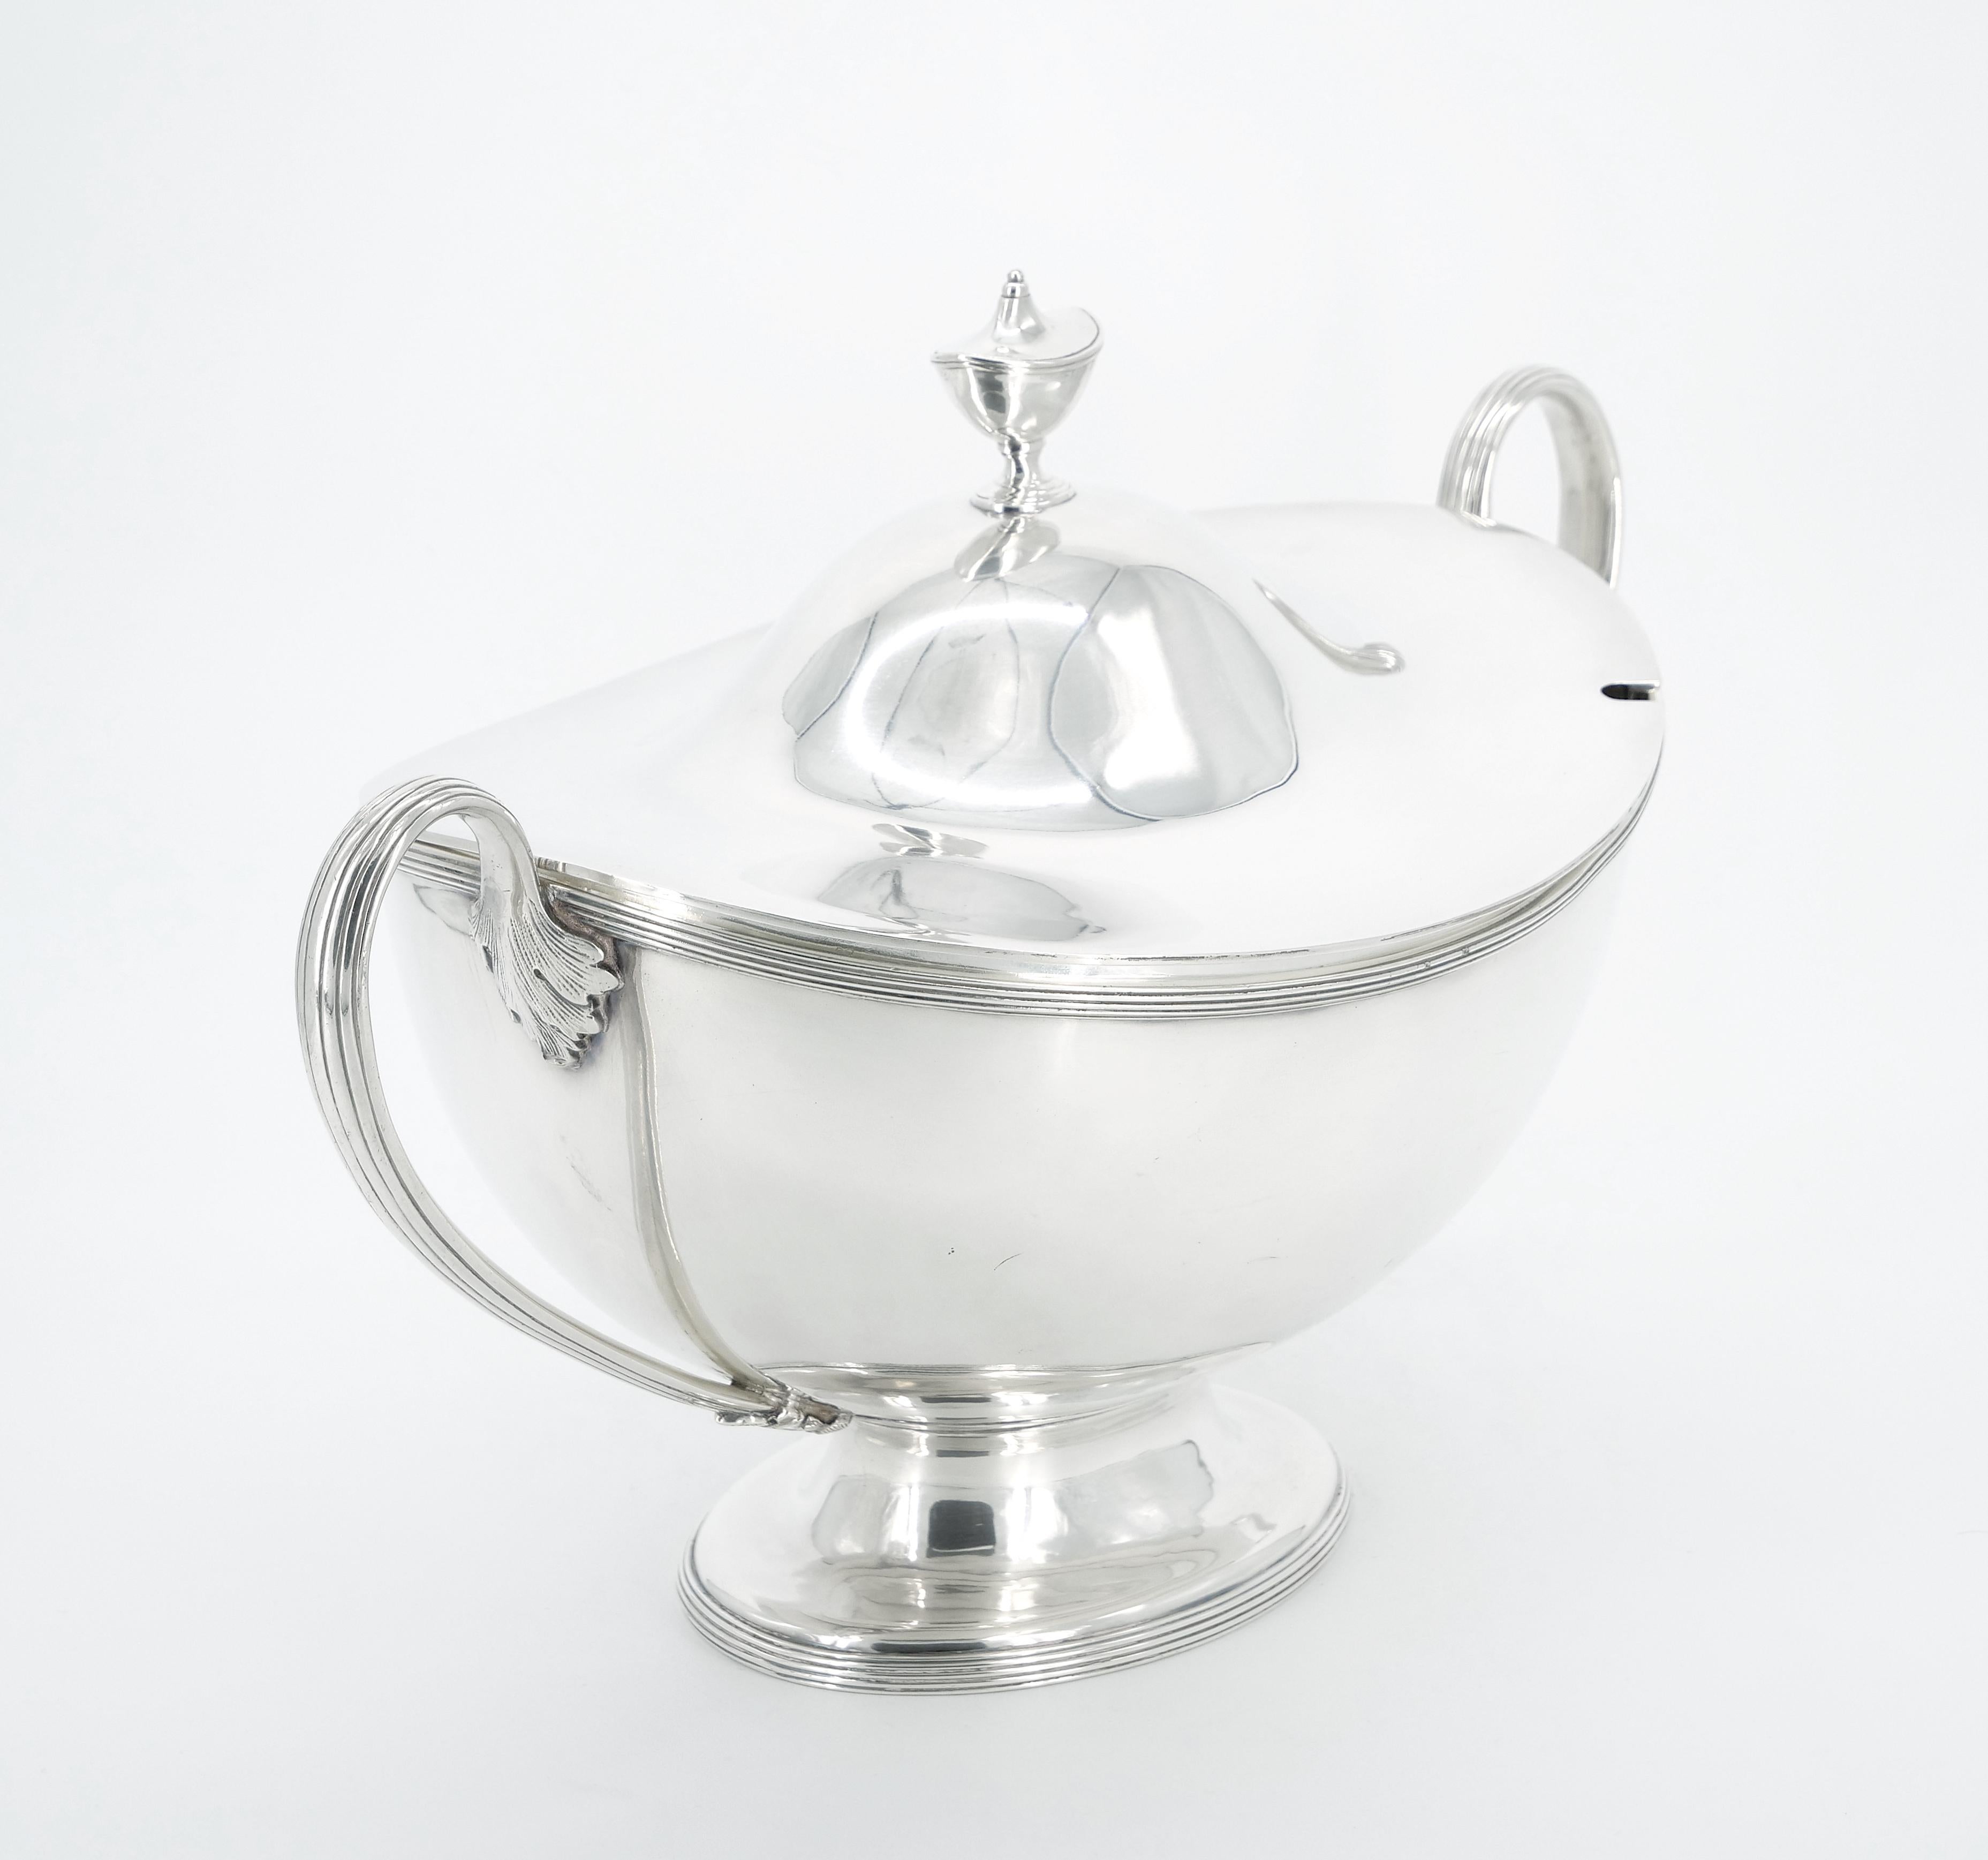 Immerse yourself in the refined elegance of our Large Early 20th Century English Silver Plate Tableware Covered Tureen. This striking piece boasts a sleek and clean Art Deco design, featuring a distinctive boat shape with two gracefully arched,